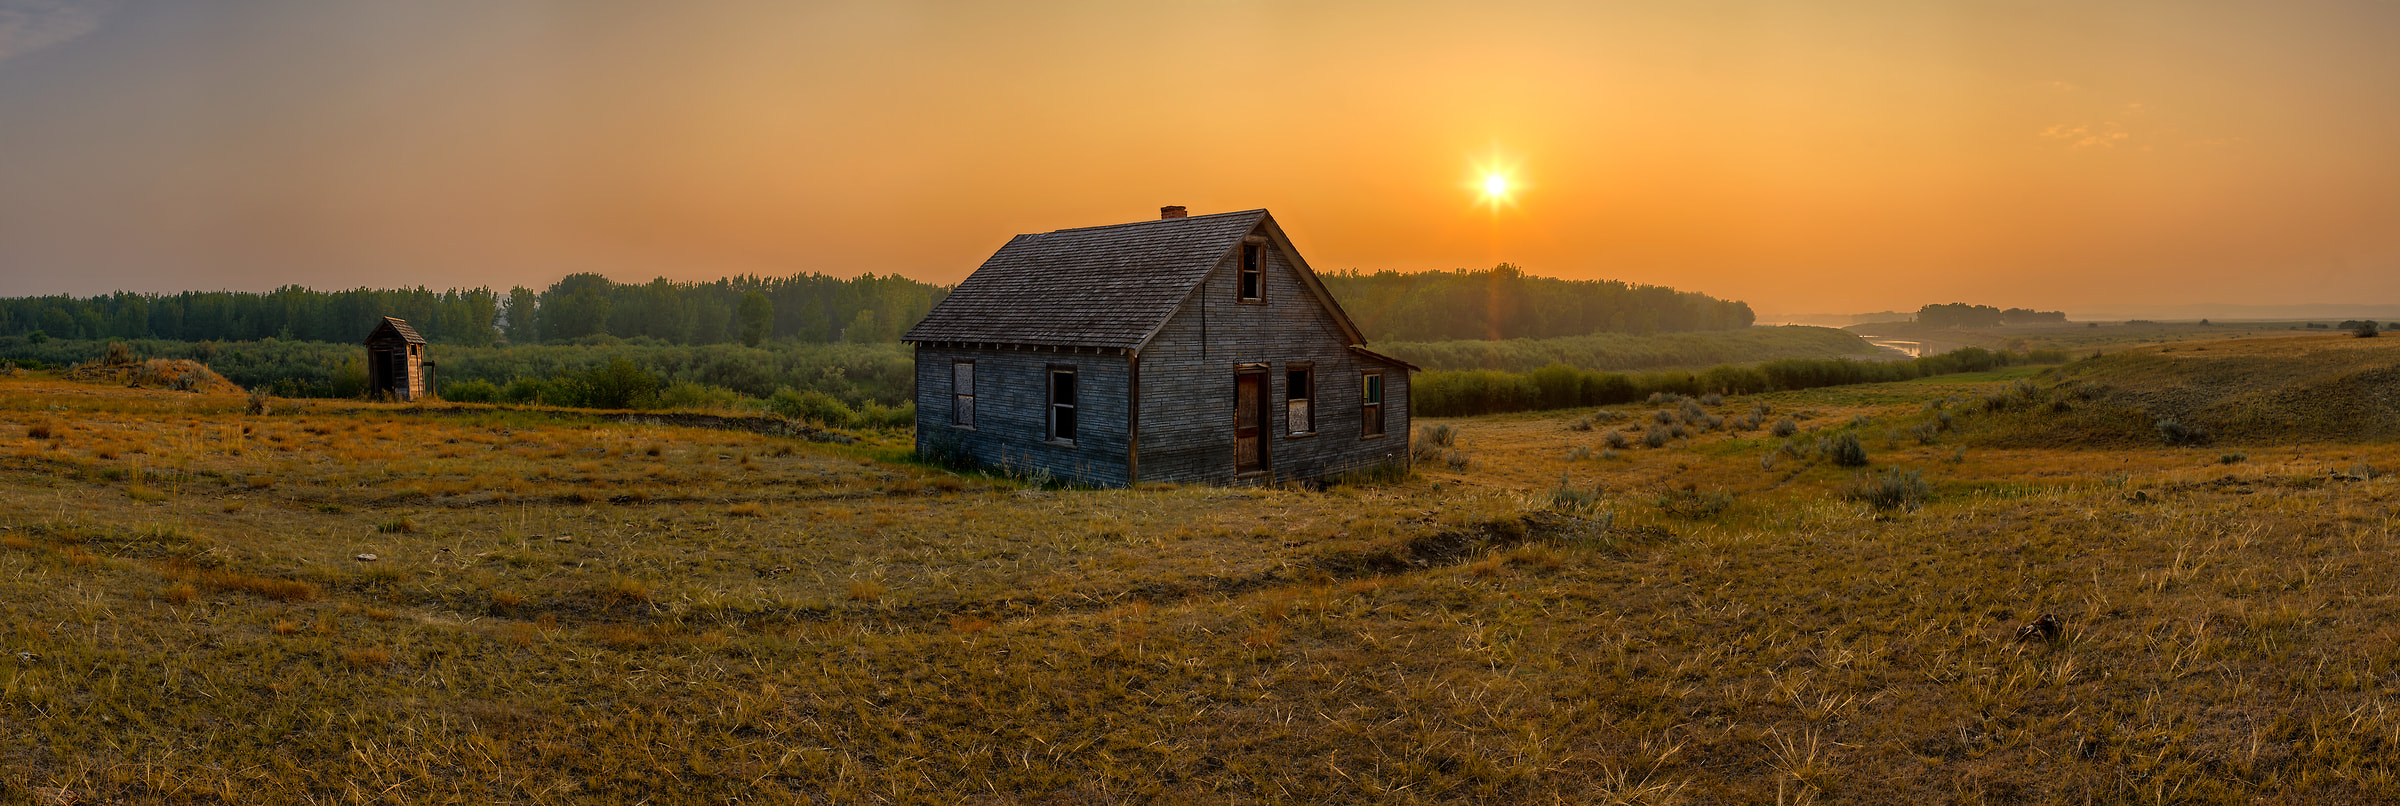 220 megapixels! A very high resolution, large-format VAST photo of farmland, grasslands, the prairie, and an old abandoned house; fine art landscape photo created at sunrise by Scott Dimond on the Great Plains in Saskatchewan, Canada